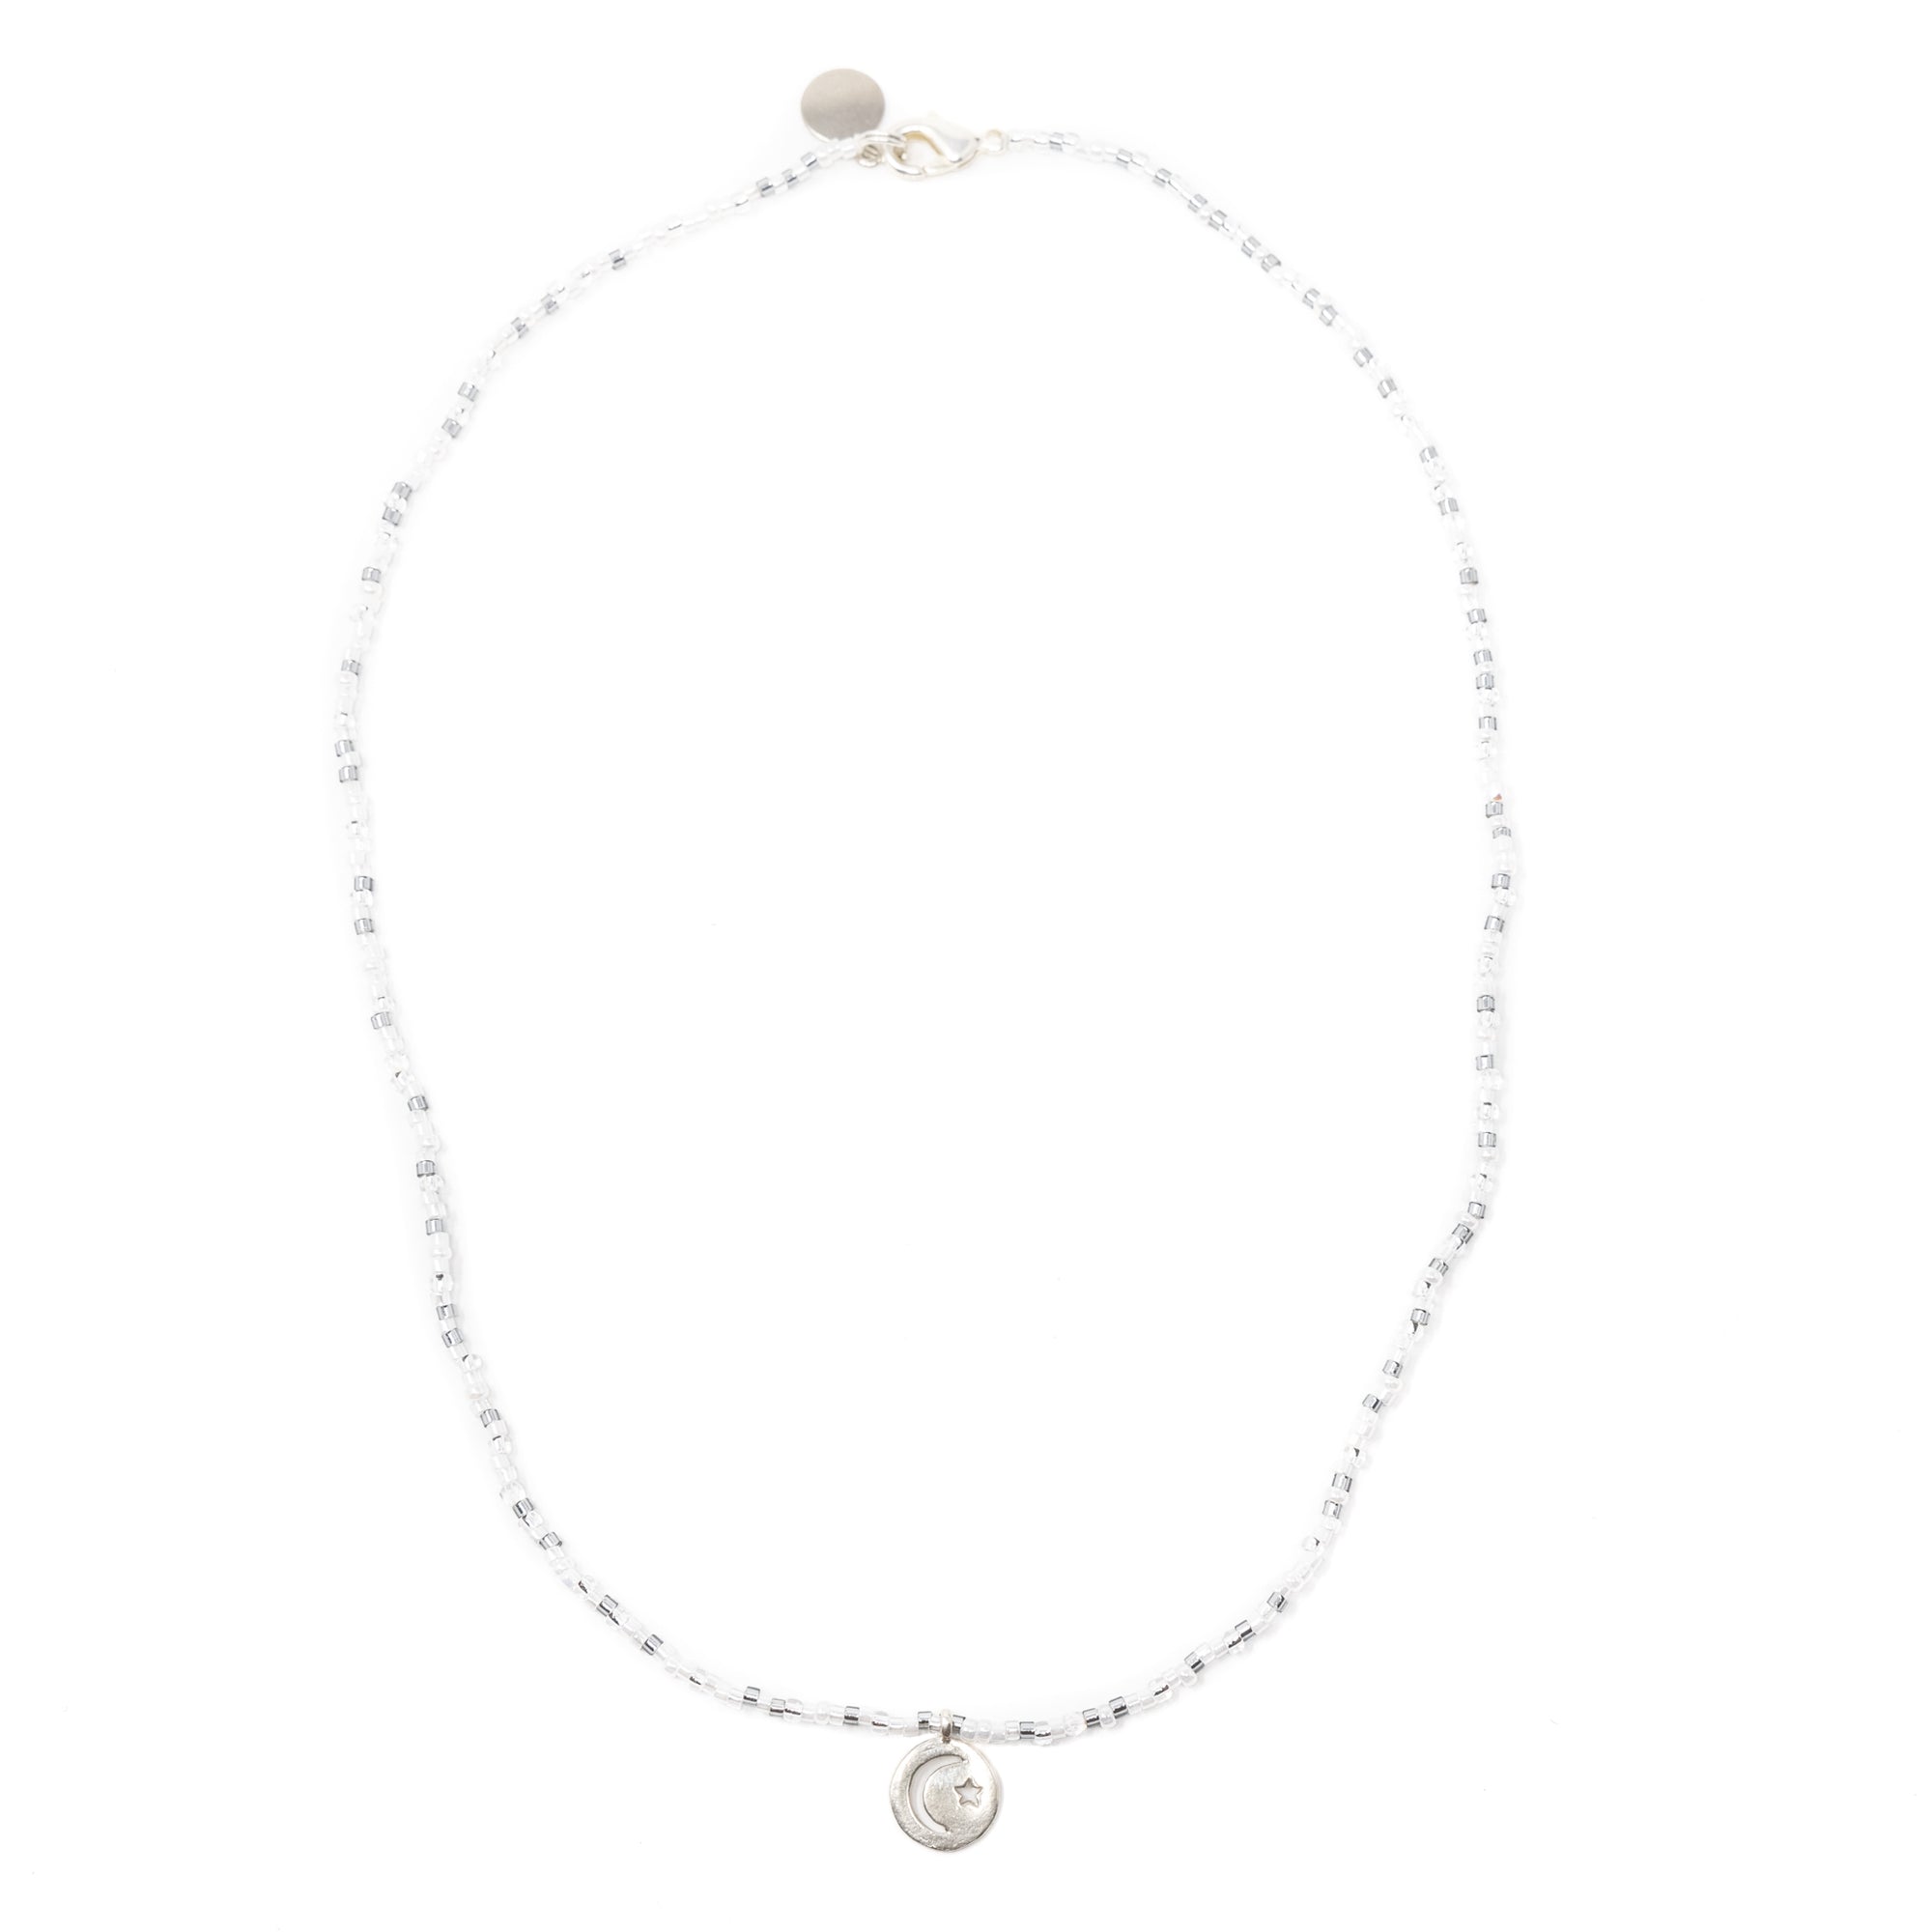 Silver & White Shine Bright Moon Charm Necklace